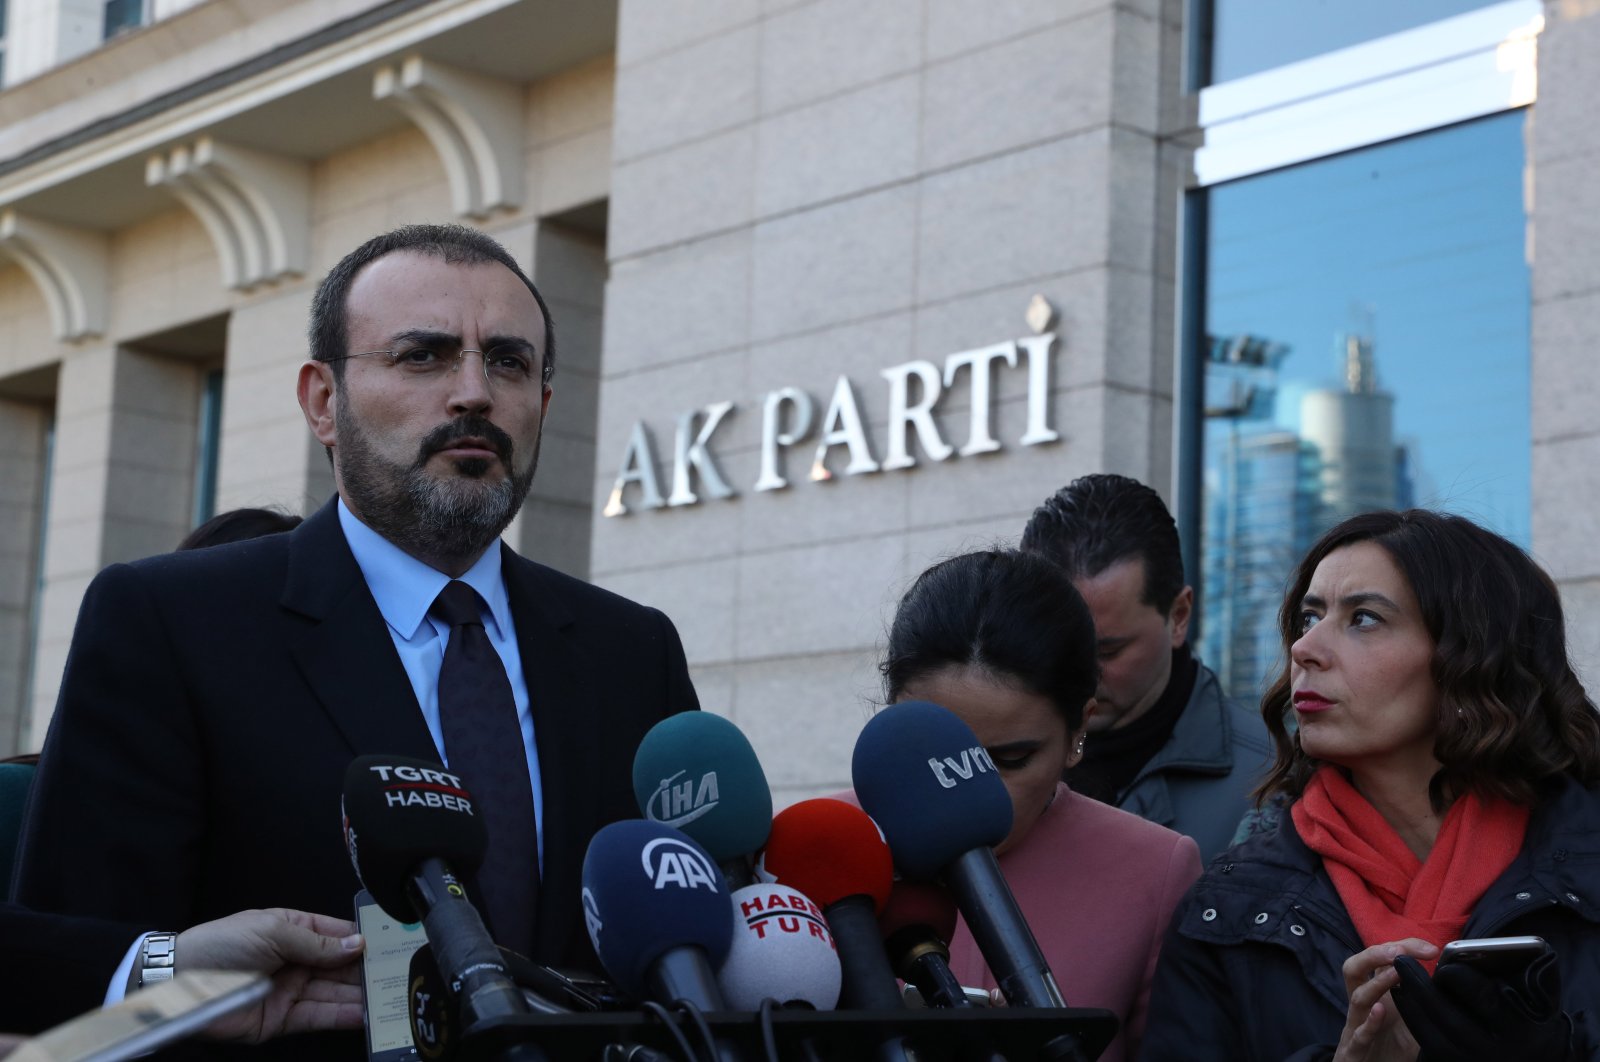 Justice and Development Party (AK Party) Deputy Chairman Mahir Ünal speaks to reporters in front of the AK Party headquarters following a meeting, in this undated file photo, Ankara, Turkey. (Sabah Photo)